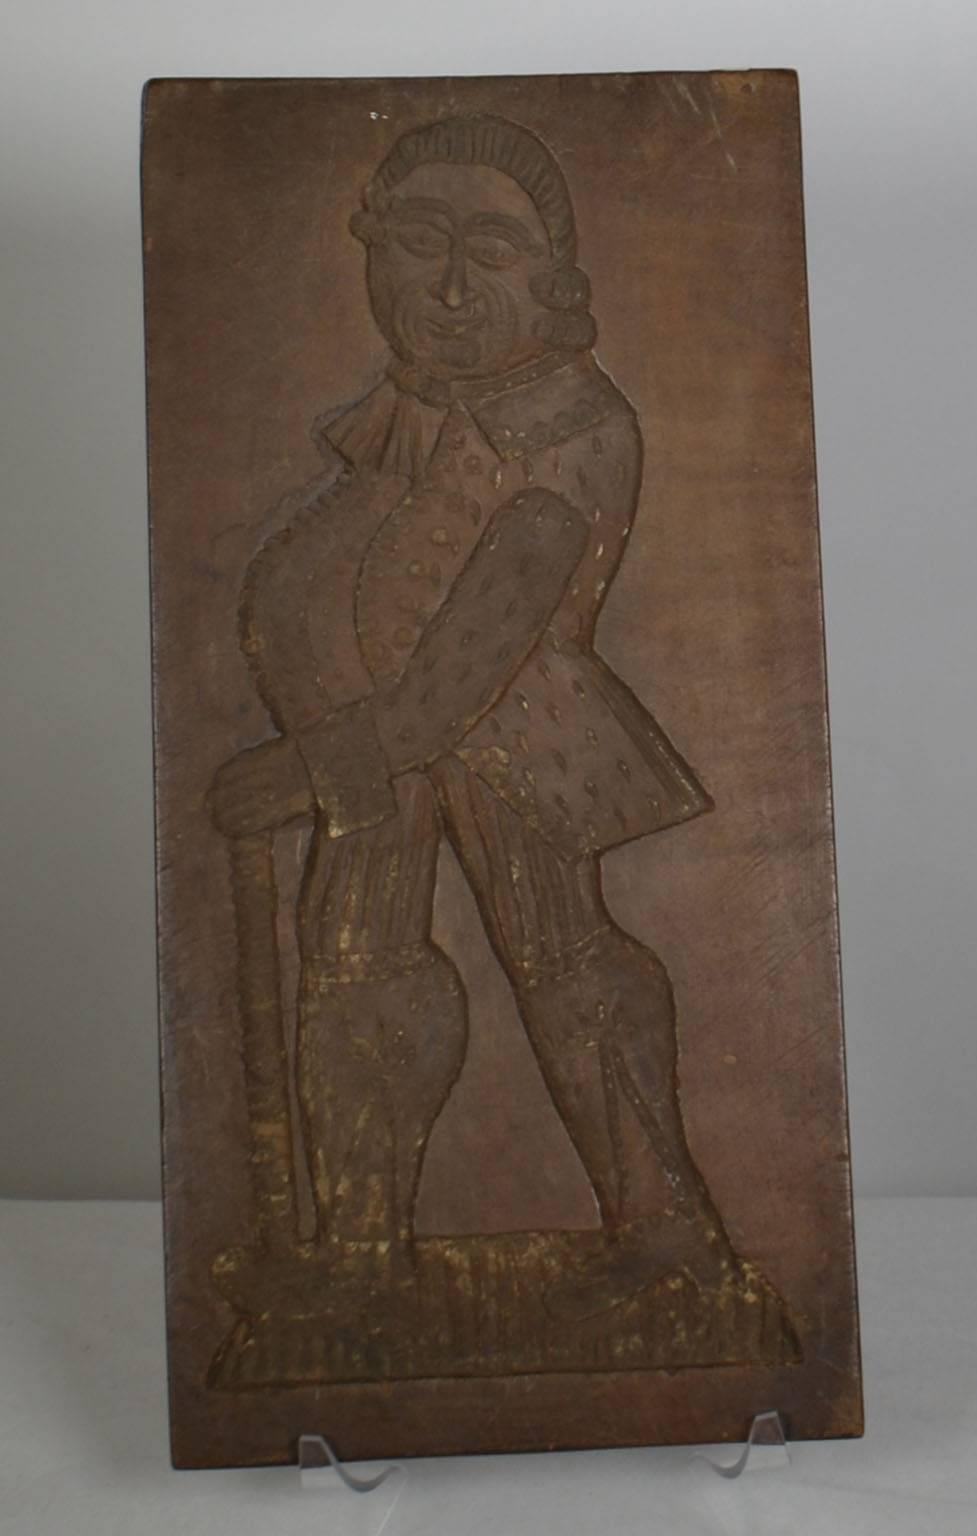 Double sided wooden gingerbread mold (Man and Woman), circa 1850.